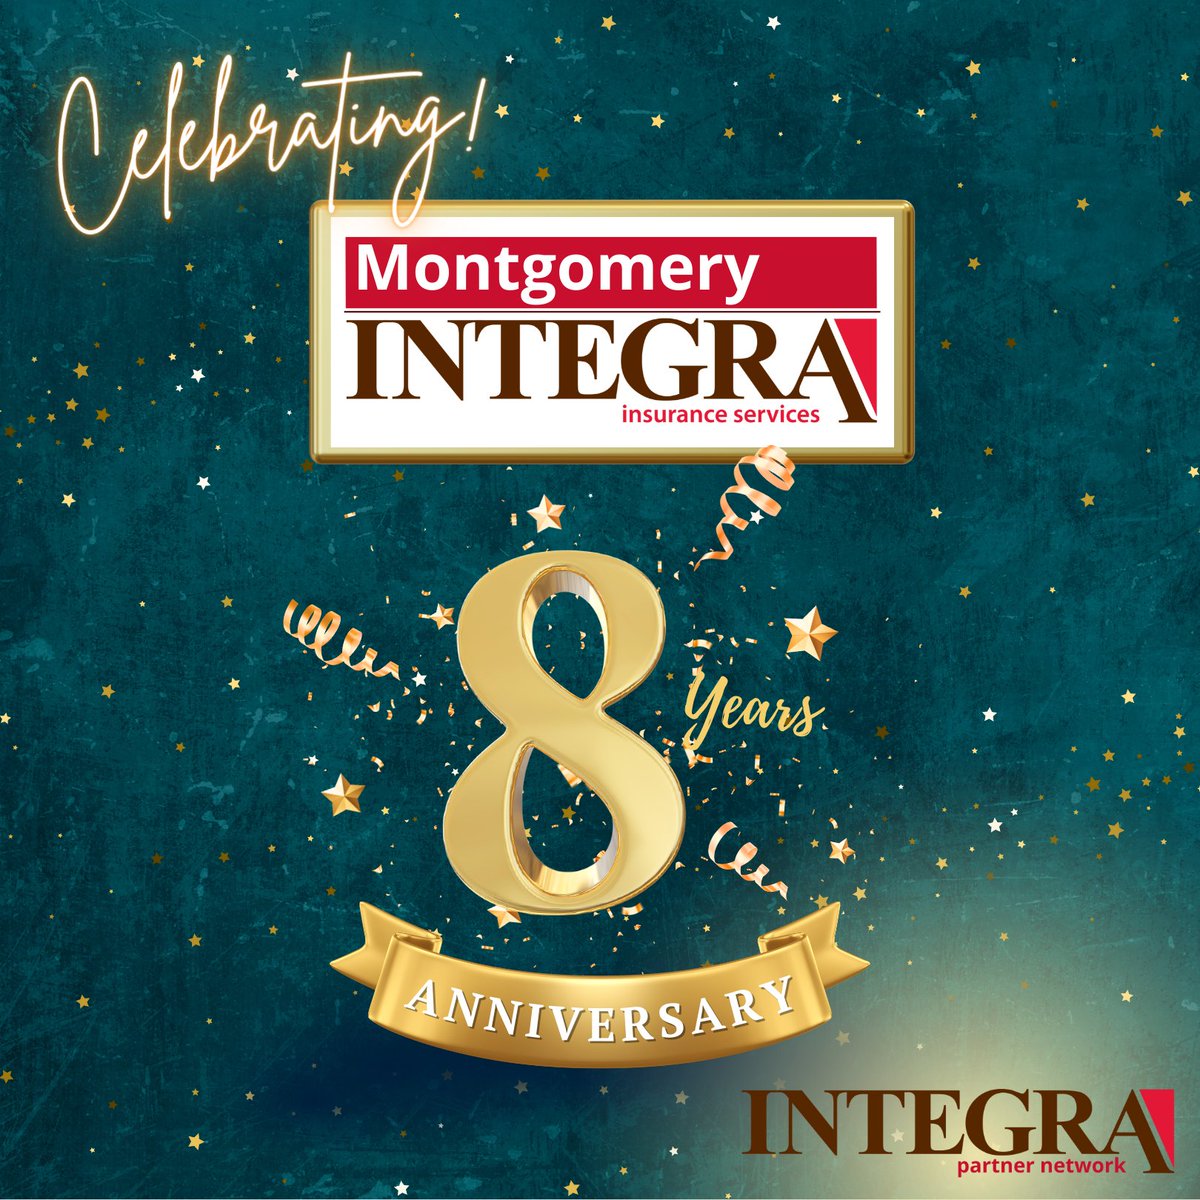 Excited to celebrate 8 years of success with Montgomery Integra Insurance and the Integra Partner Network!

Are you ready to find your way with Integra?

#integrapartnernetwork #independentagent #findyourway #integra #insurance #insuranceagent #insuranceagency #integrainspires